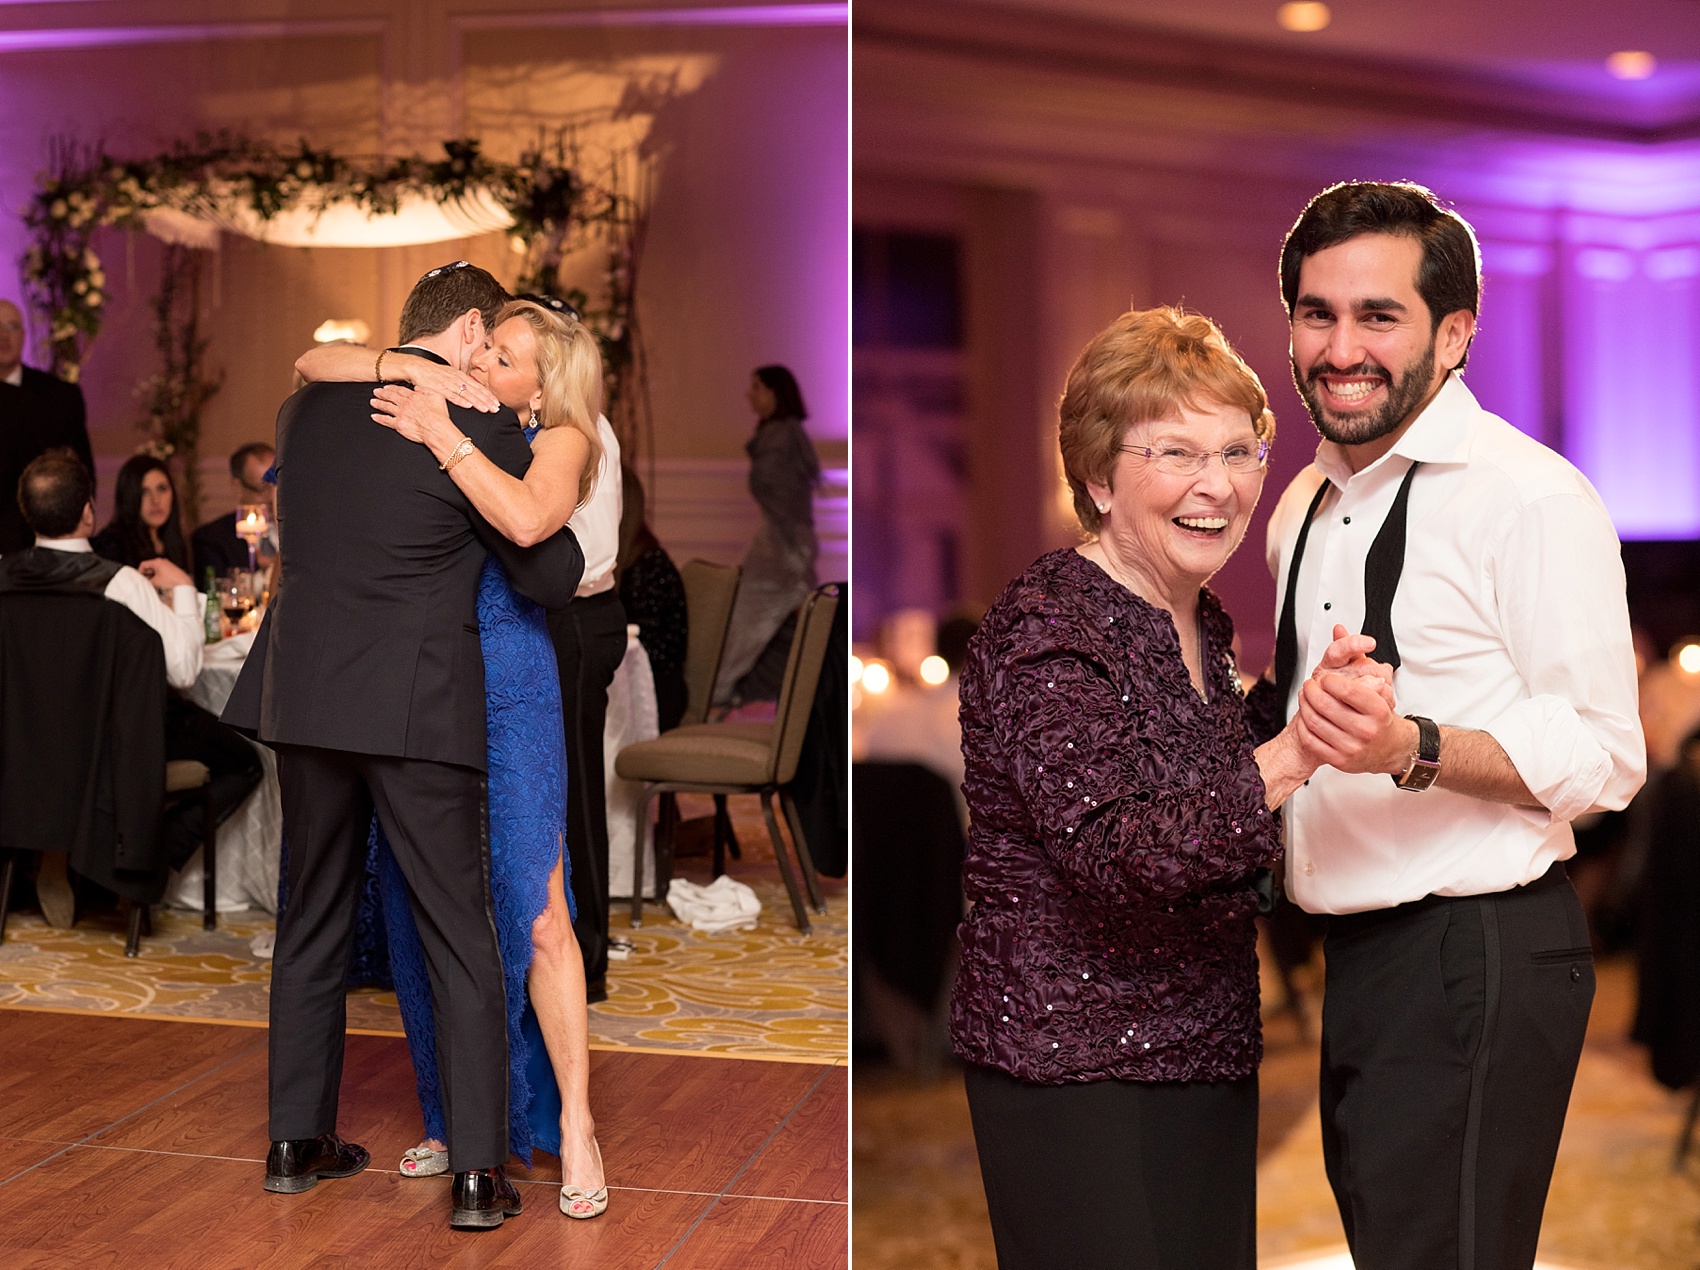 Washington, DC wedding photos by Mikkel Paige. The groom and his mom for a mother son dance at The Ritz Carlton, Pentagon City.